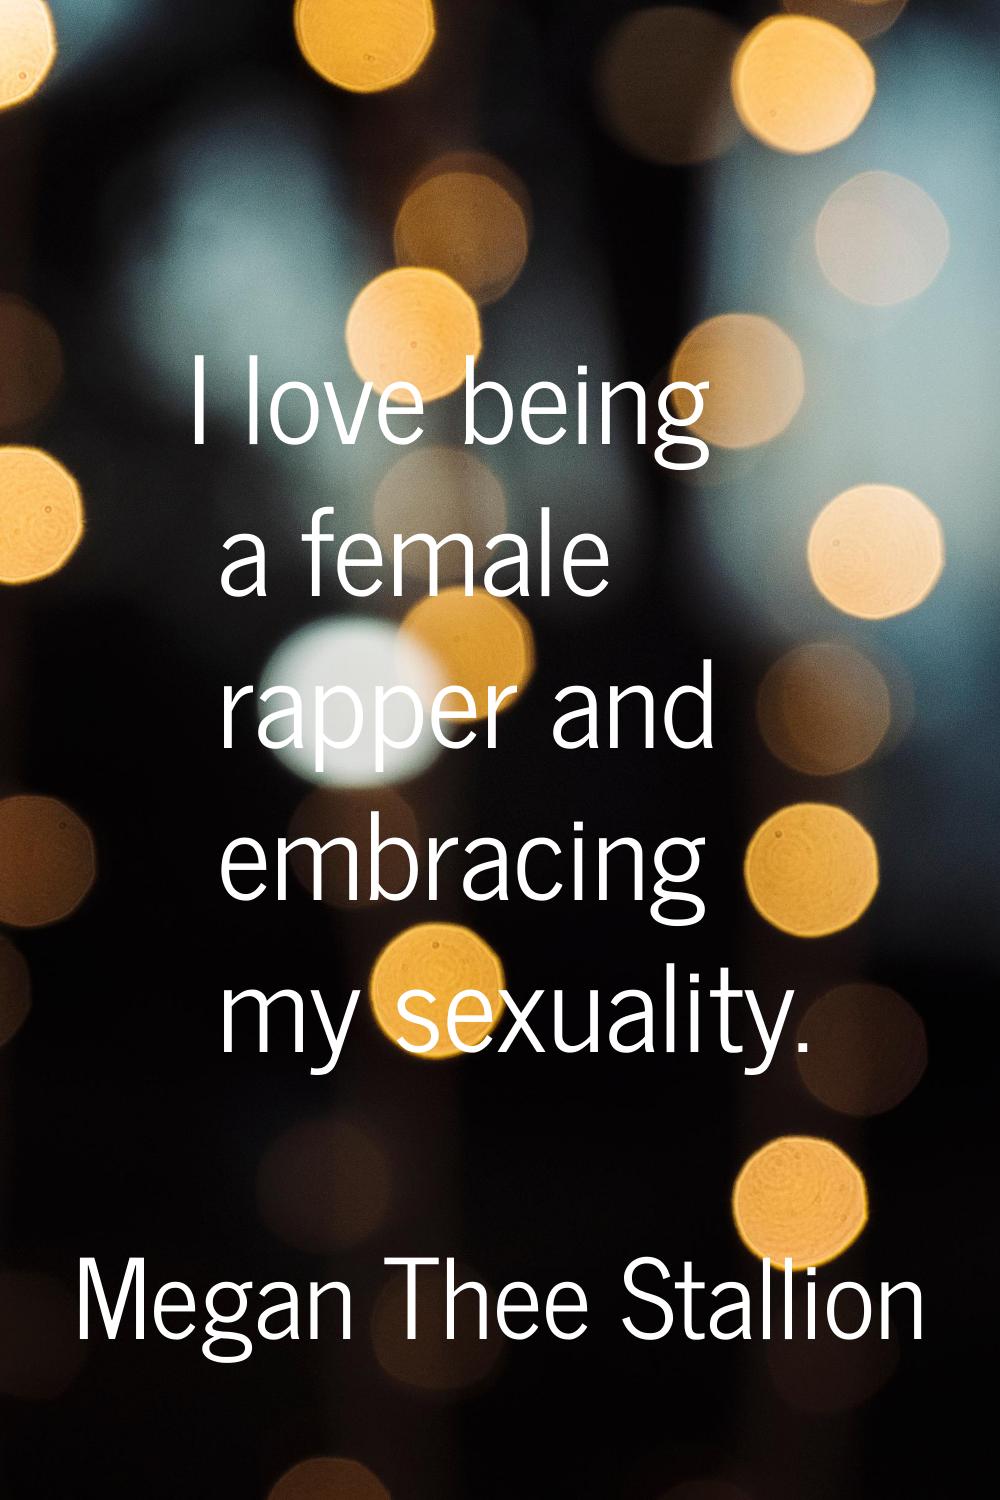 I love being a female rapper and embracing my sexuality.